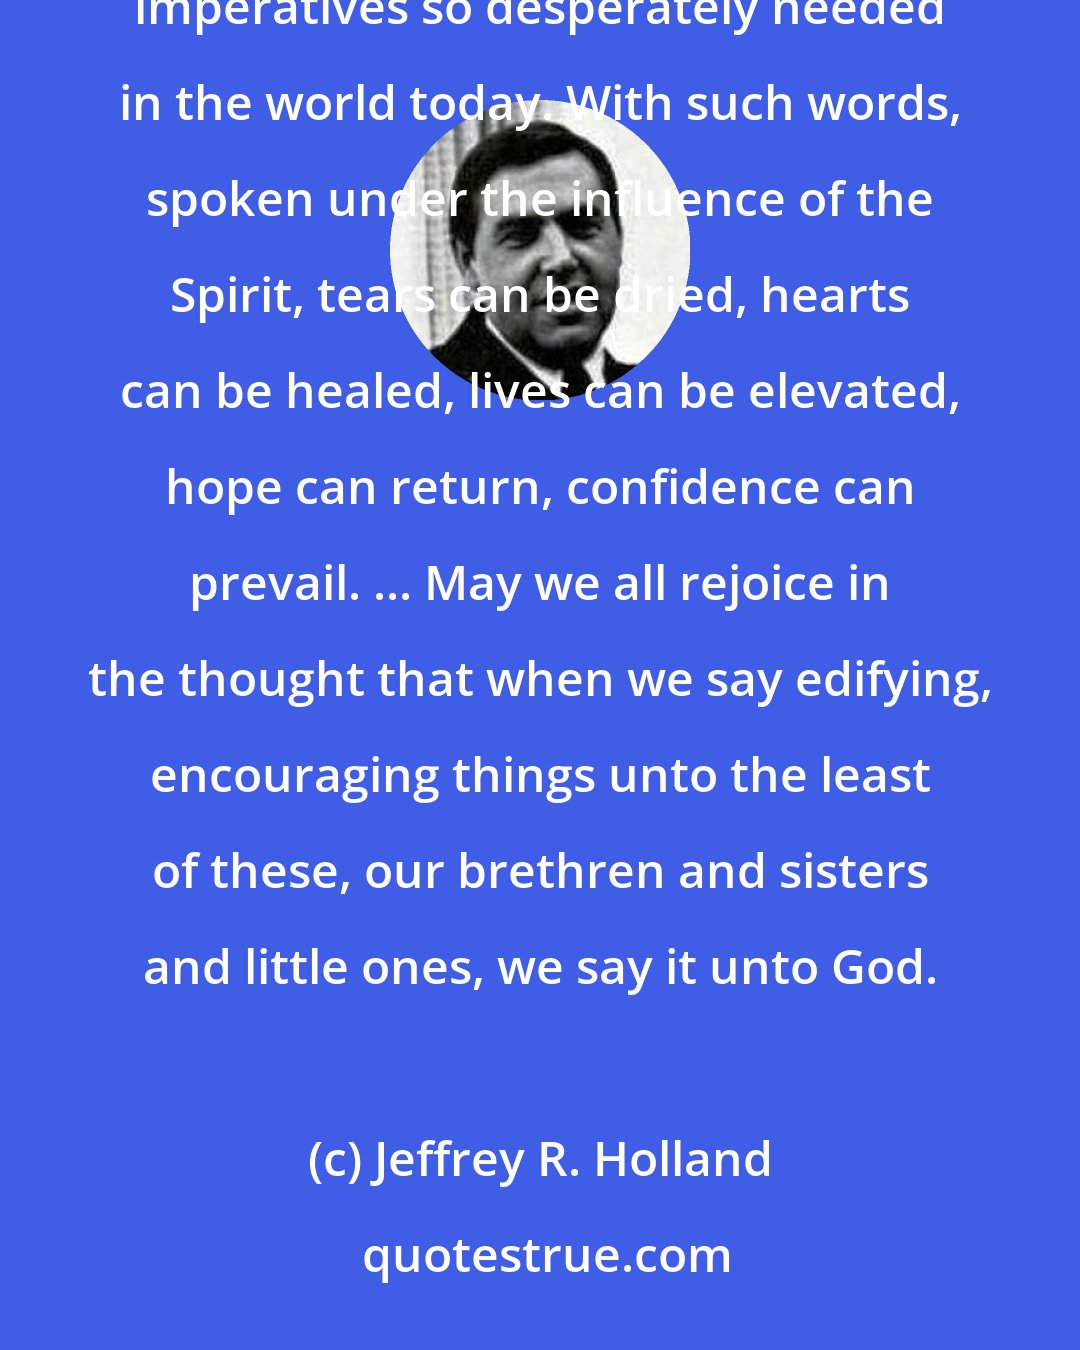 Jeffrey R. Holland: Our words, like our deeds, should be filled with faith and hope and charity, the three great Christian imperatives so desperately needed in the world today. With such words, spoken under the influence of the Spirit, tears can be dried, hearts can be healed, lives can be elevated, hope can return, confidence can prevail. ... May we all rejoice in the thought that when we say edifying, encouraging things unto the least of these, our brethren and sisters and little ones, we say it unto God.